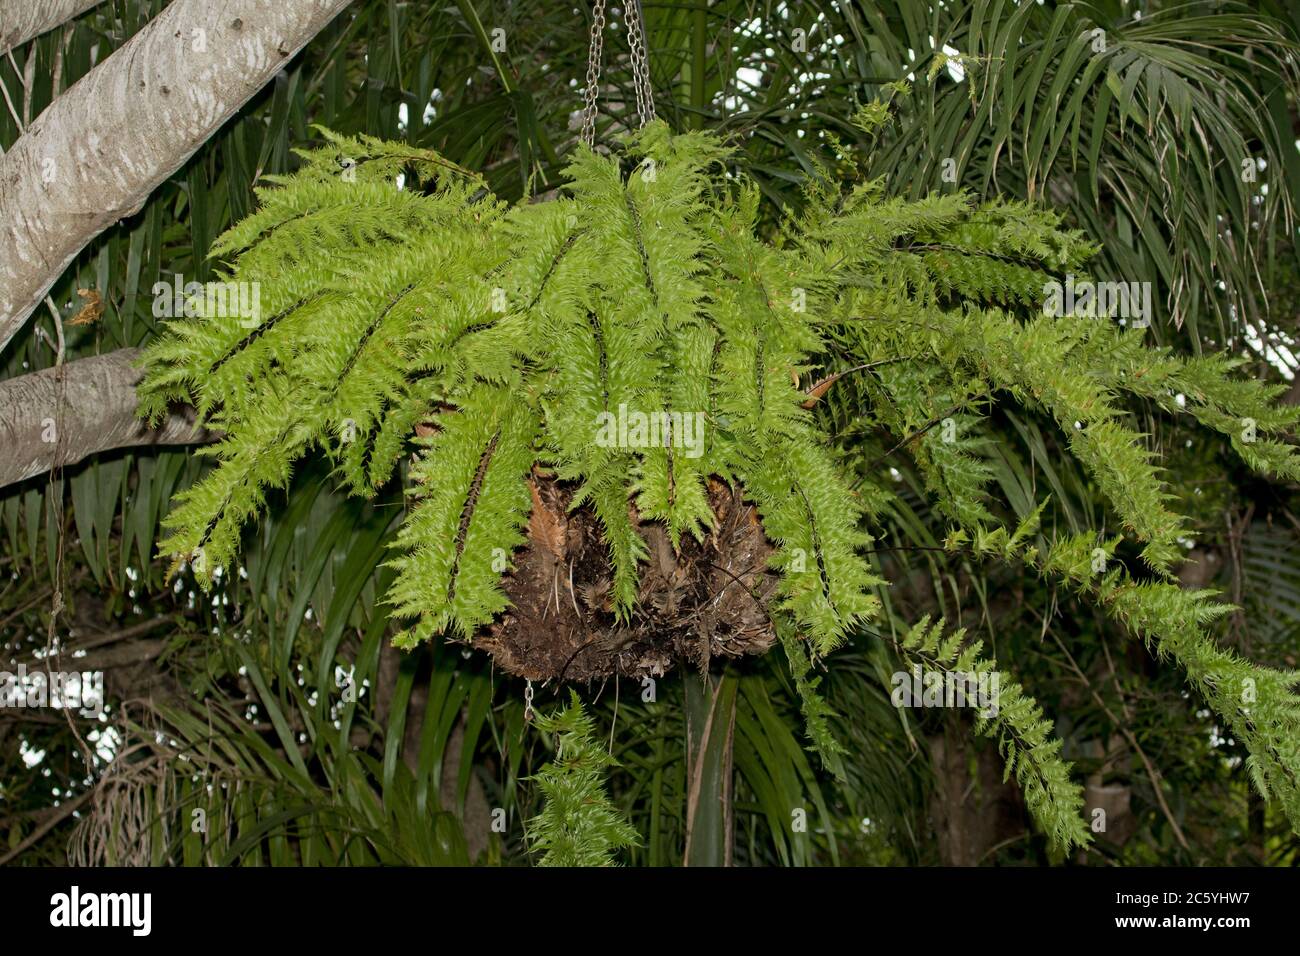 Large fern with vibrant green fronds growing in hanging basket suspended from branch of tree against background of dark green foliage in garden Stock Photo